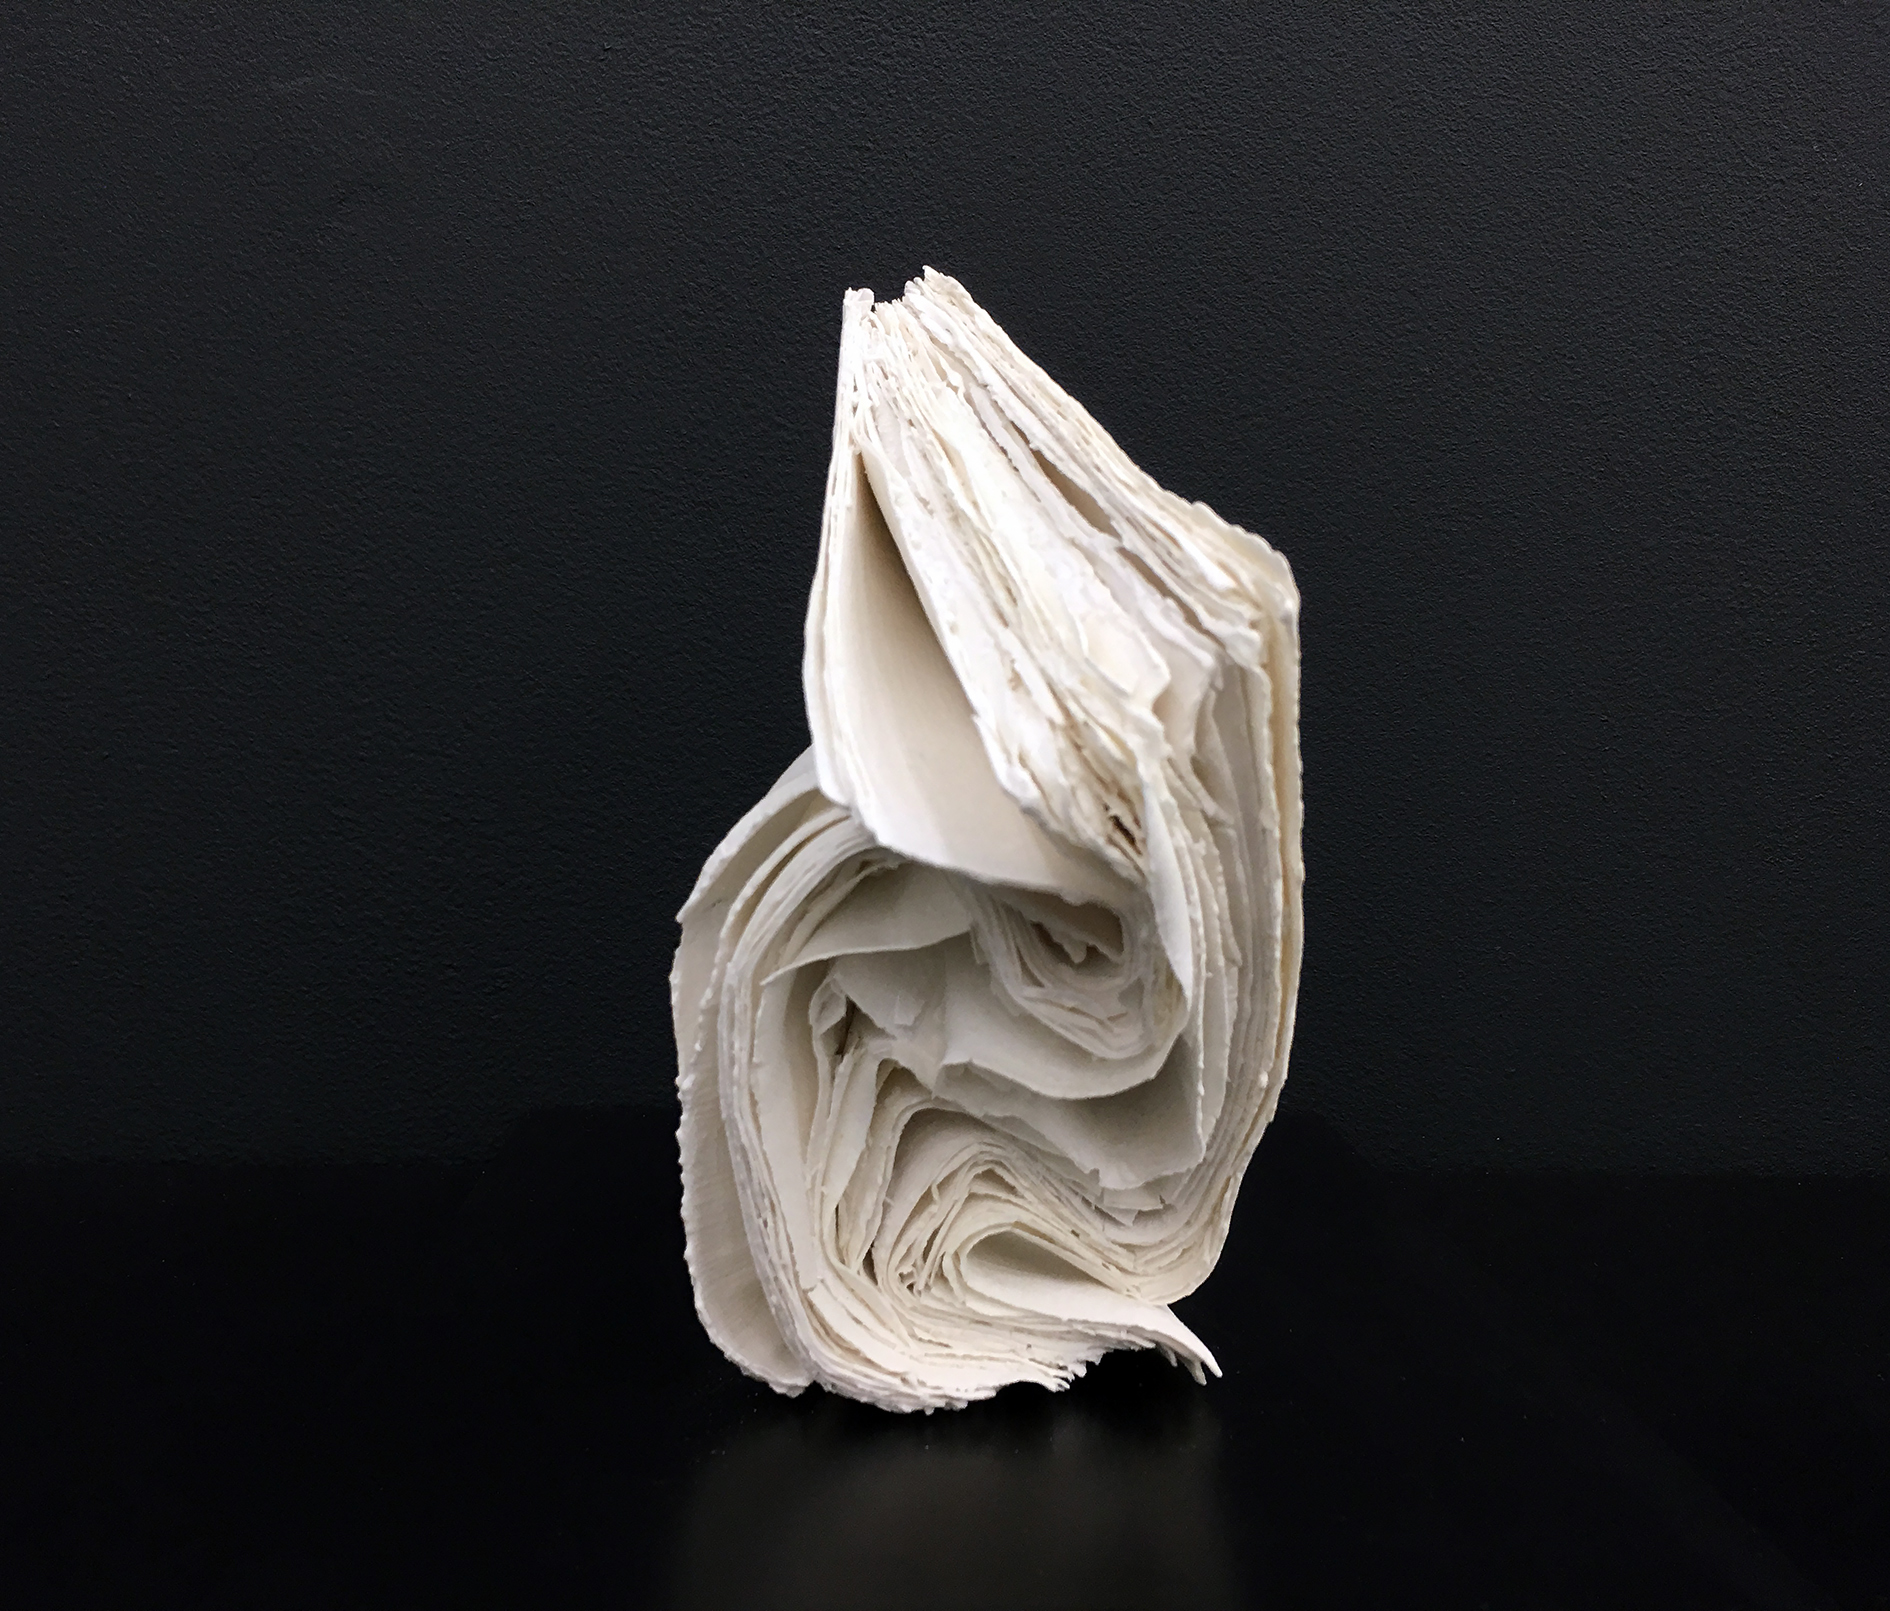   CYRUS TANG   Untitled 4  2016 Porcelain and paper 9 x 12 x 16 cm 